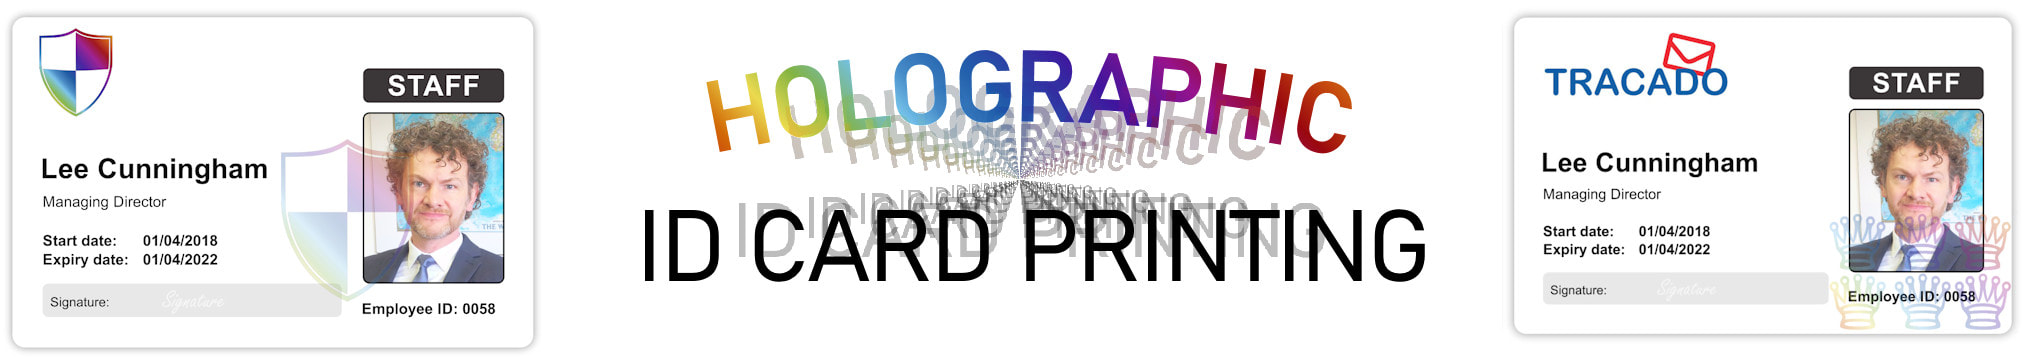 Stoke on trent holographic ID card print service. Employee Identity cards with hologram or holograph security mark.